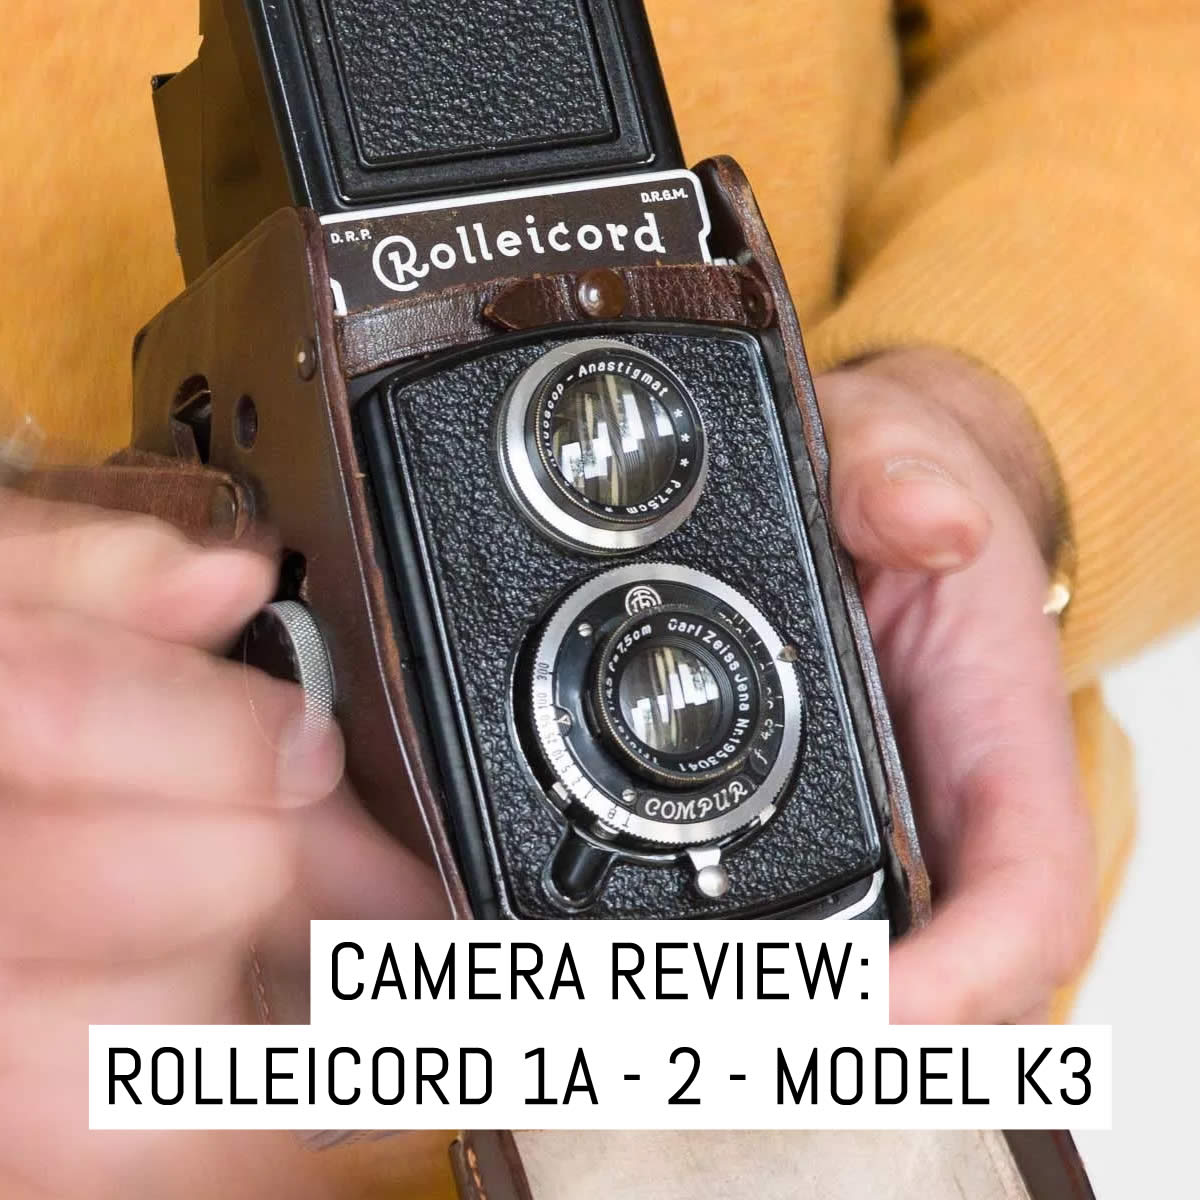 Camera Re The Rolleicord 1a Model K3 By Jens Kotlenga